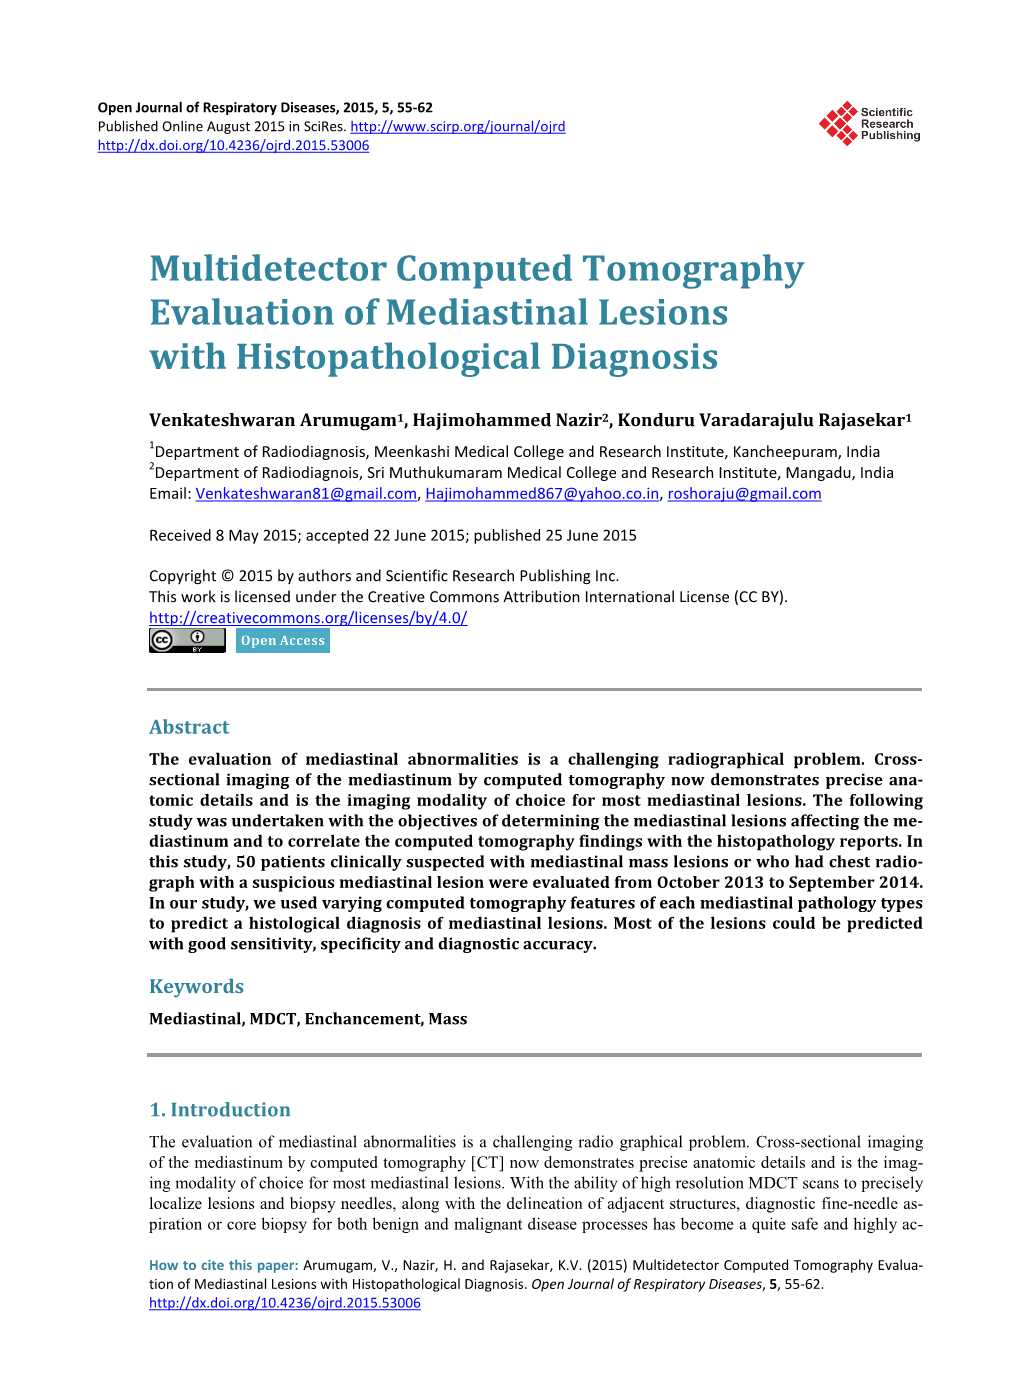 Multidetector Computed Tomography Evaluation of Mediastinal Lesions with Histopathological Diagnosis